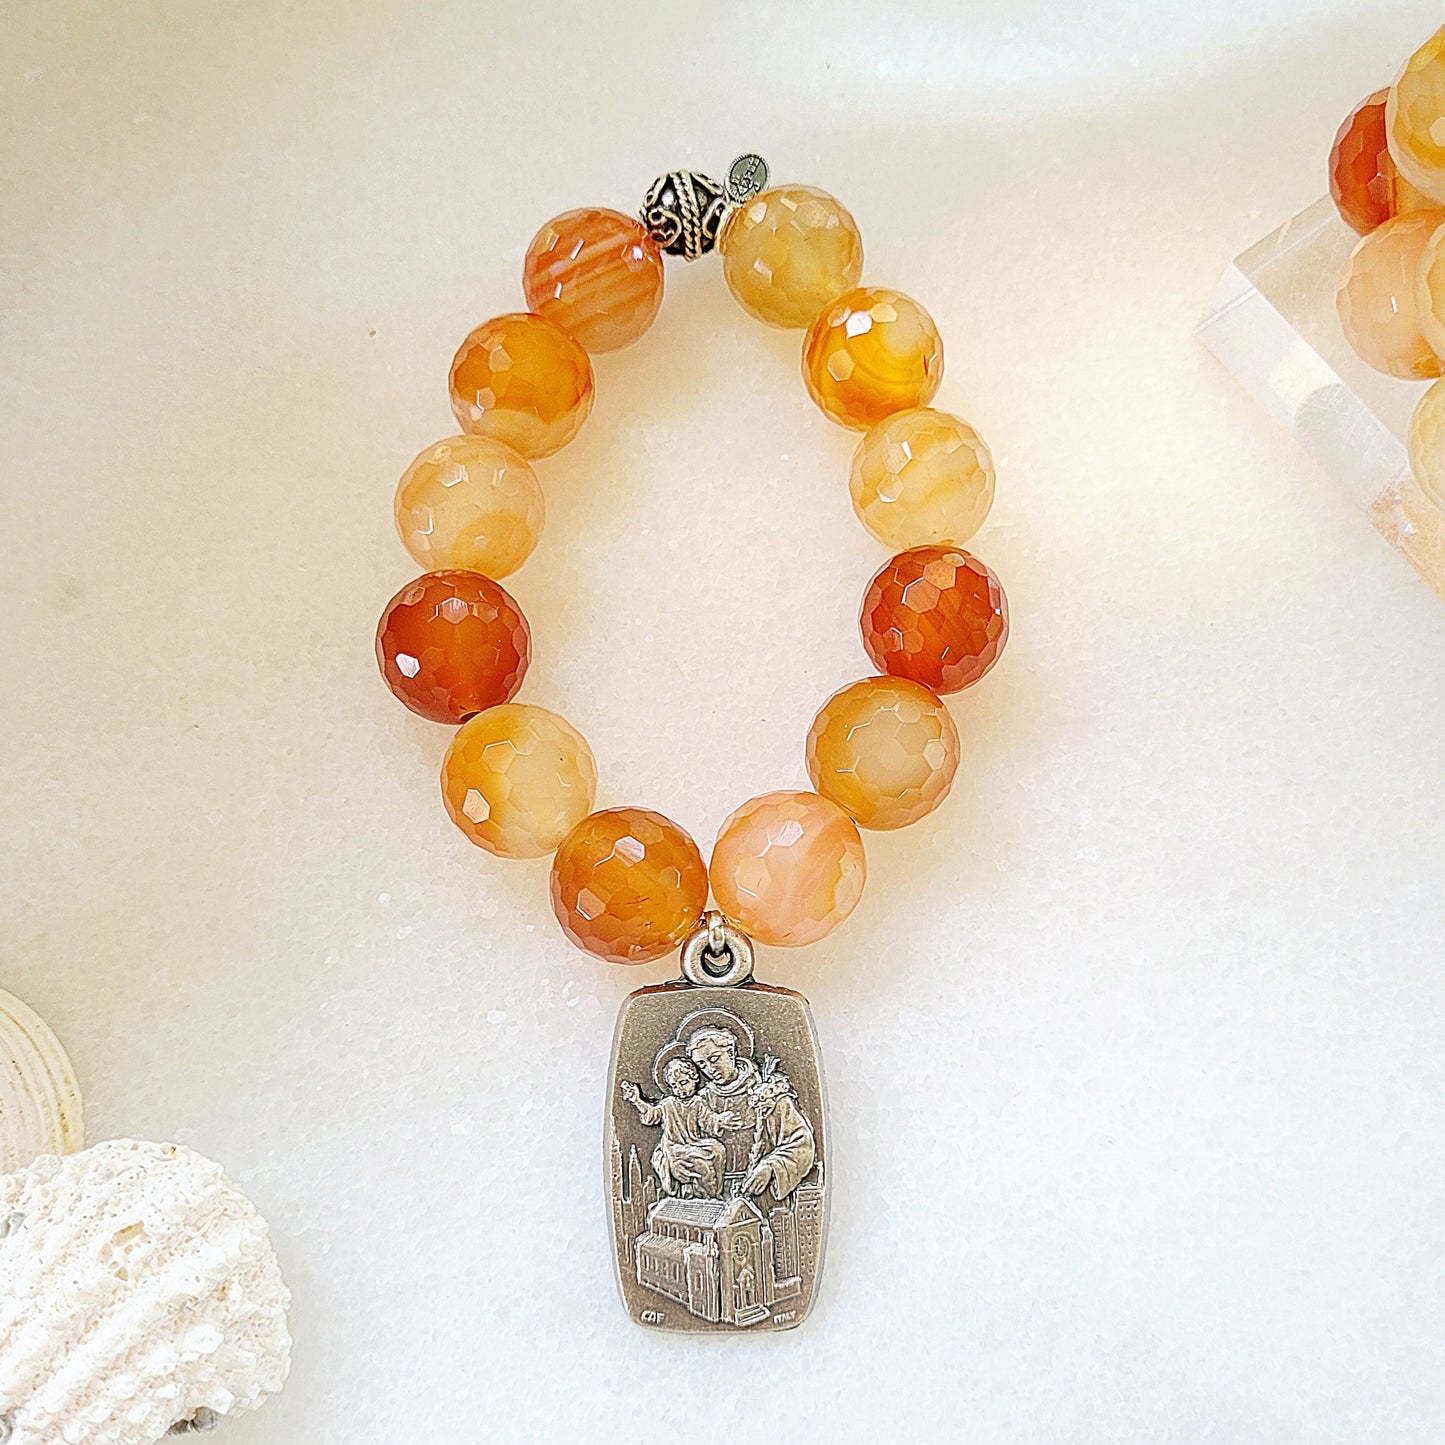 Carnelian Faceted 16mm Beaded Bracelet w/ 1988 Shrine Church of St. Anthony 100 Anniversary Medal - Afterlife Jewelry Designs